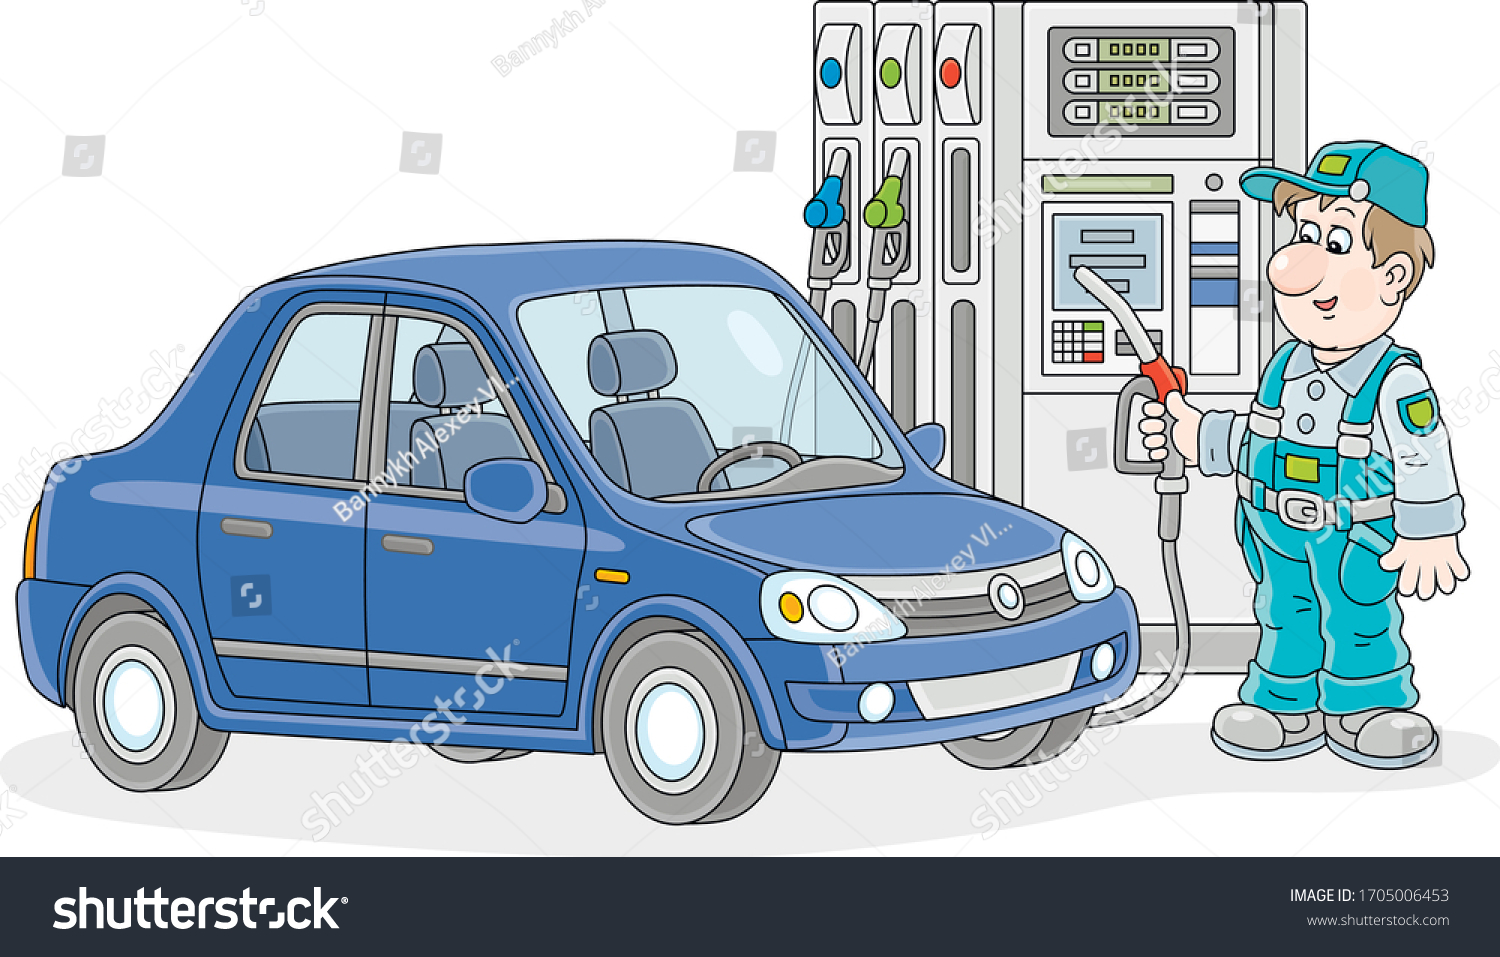 SVG of Car at a gas station with a refueling worker holding a fuel nozzle near a dispenser, vector cartoon illustration isolated on a white background svg